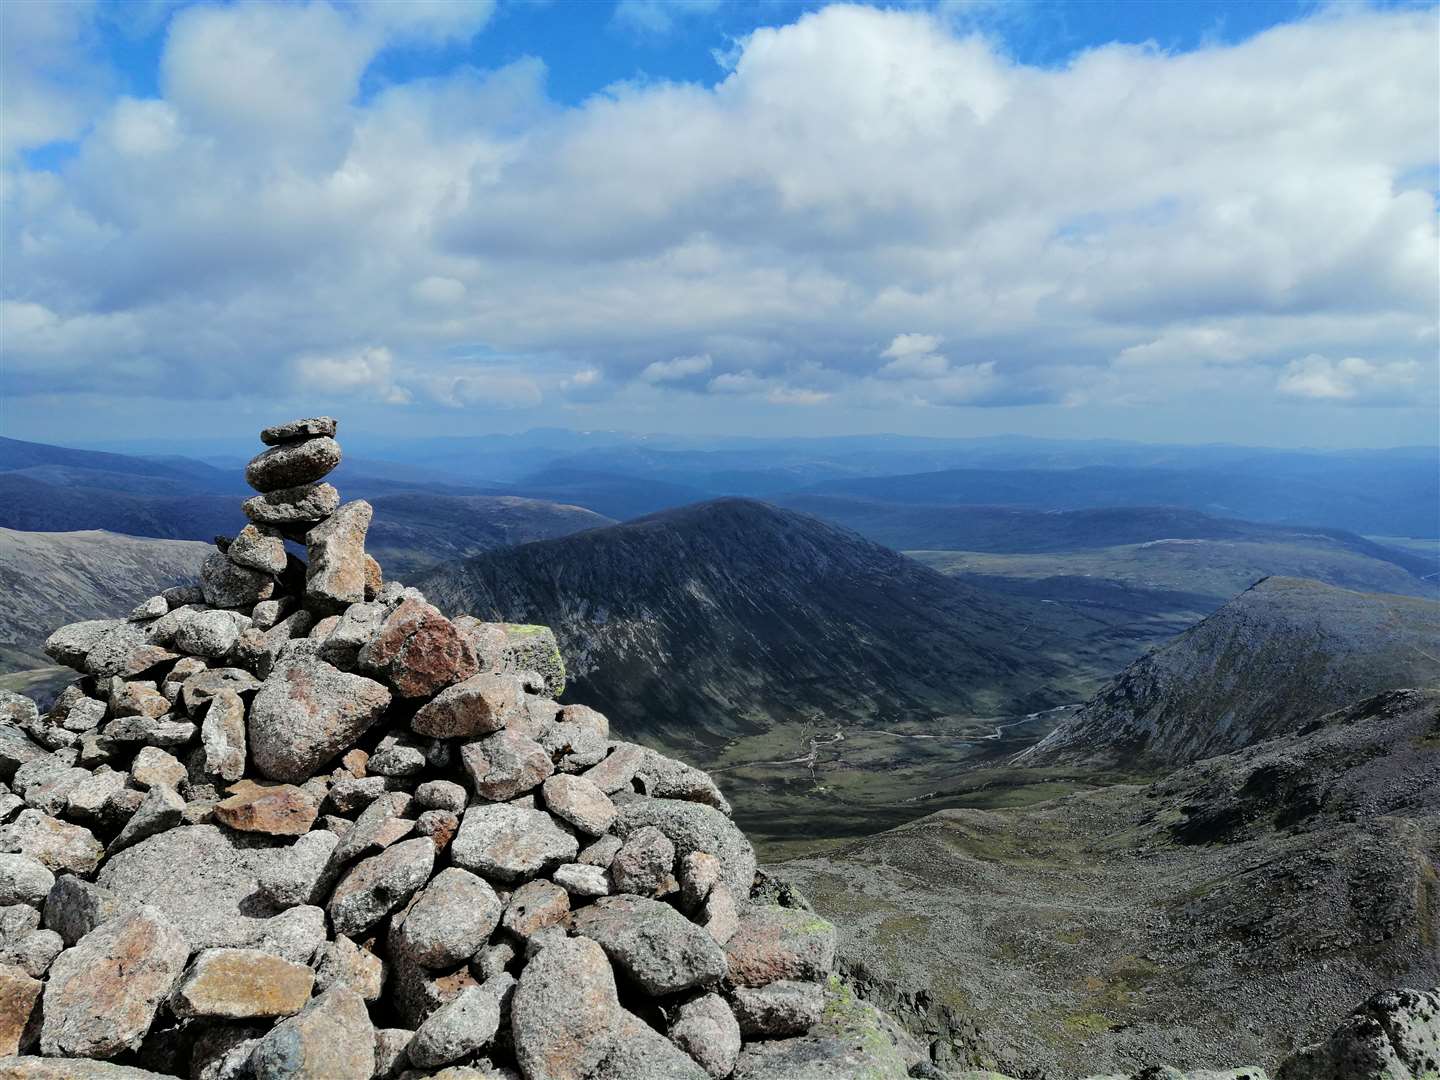 View south into the Lairig Ghru from Cairn Toul summit.